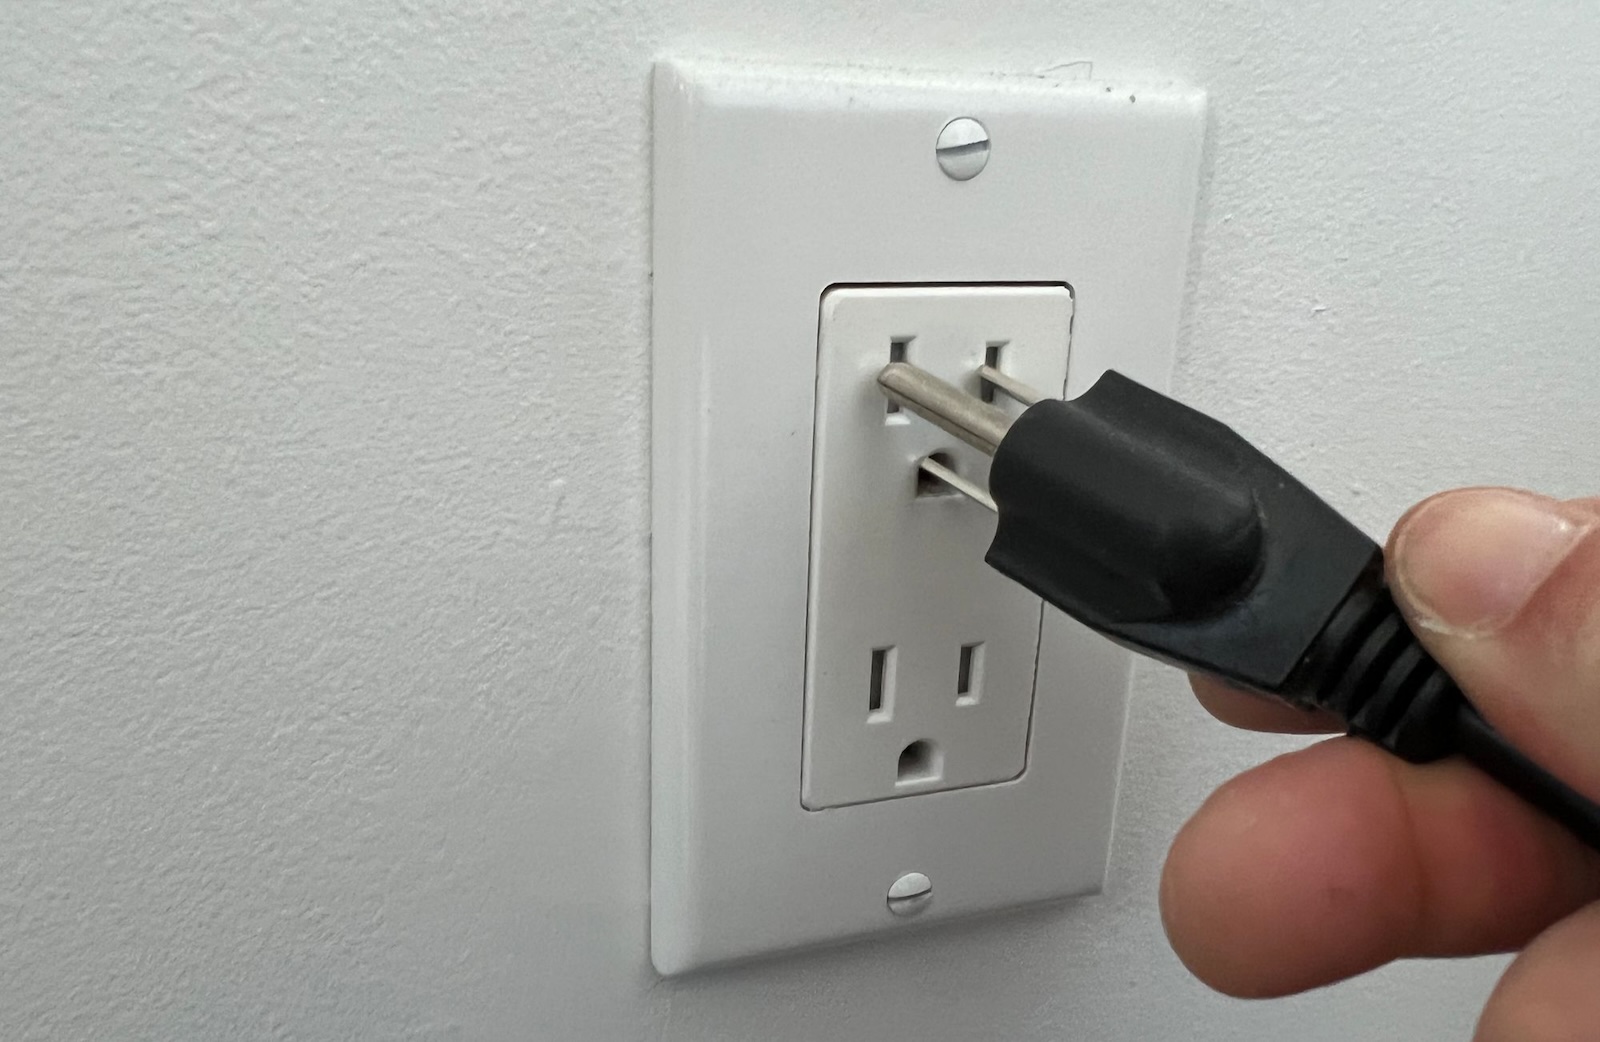 A hand plugging a plug into a socket